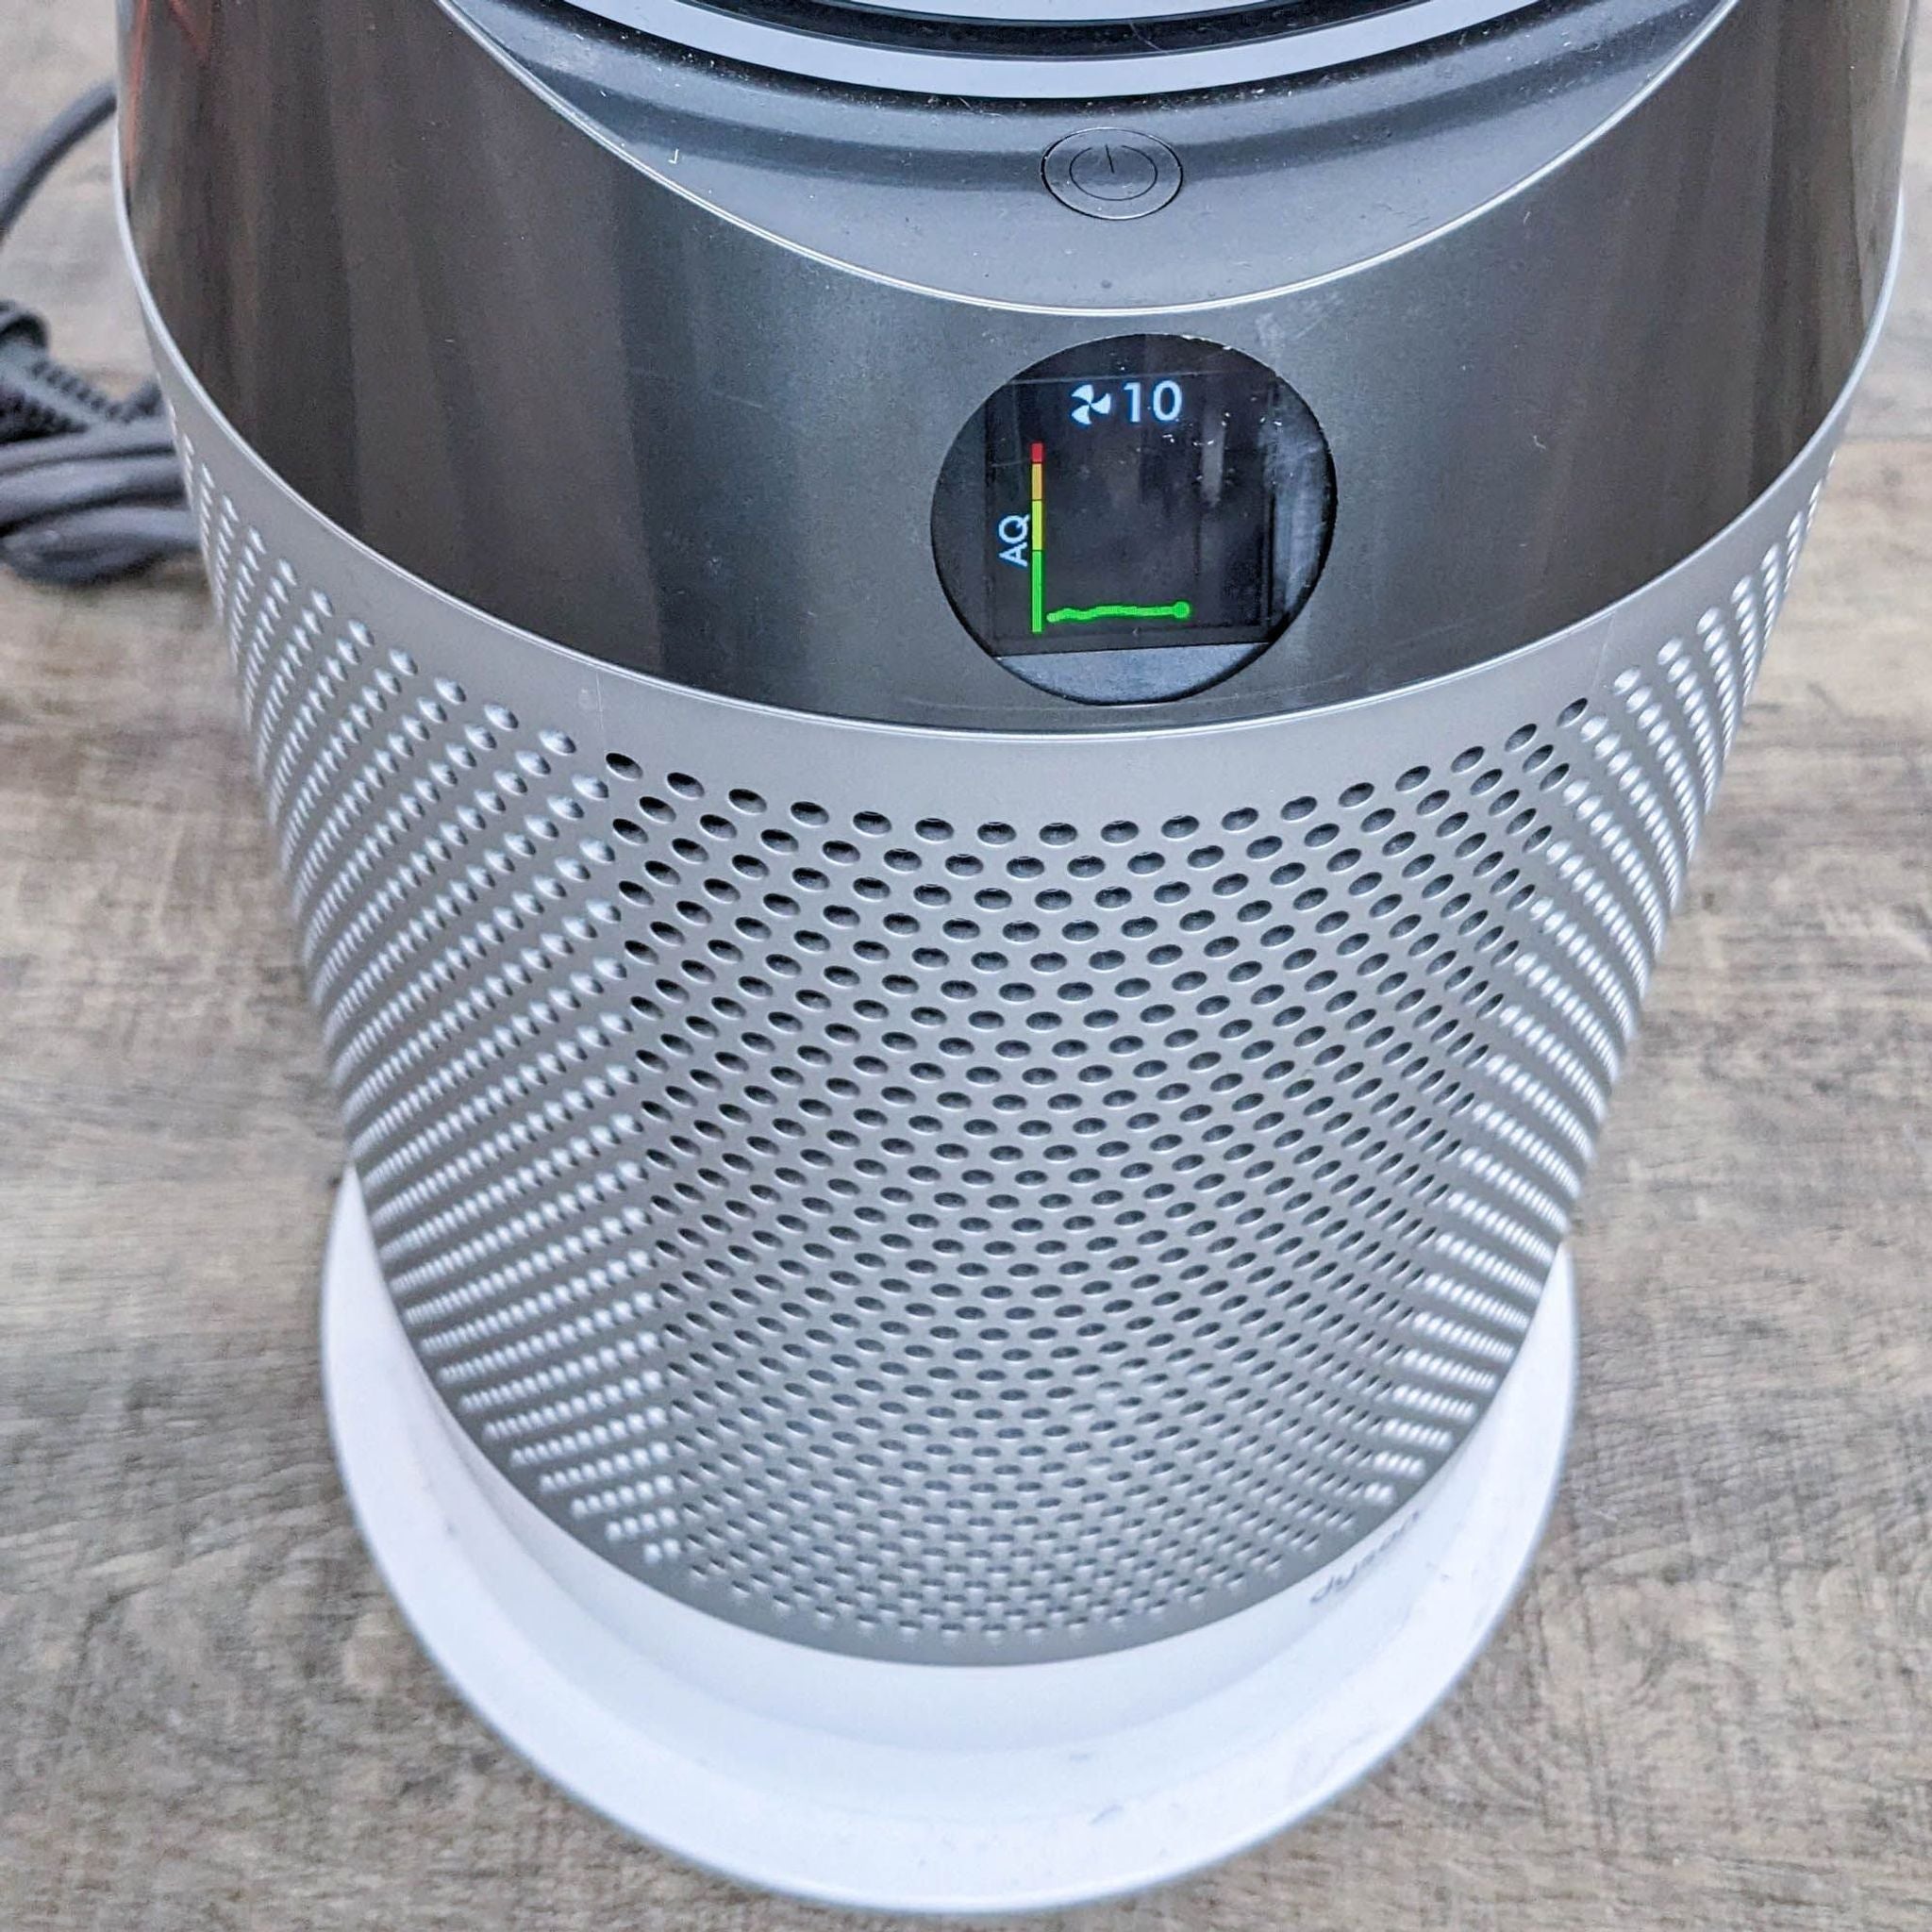 Close-up of Dyson air purifier's digital display, showing filter life and air quality indicators.